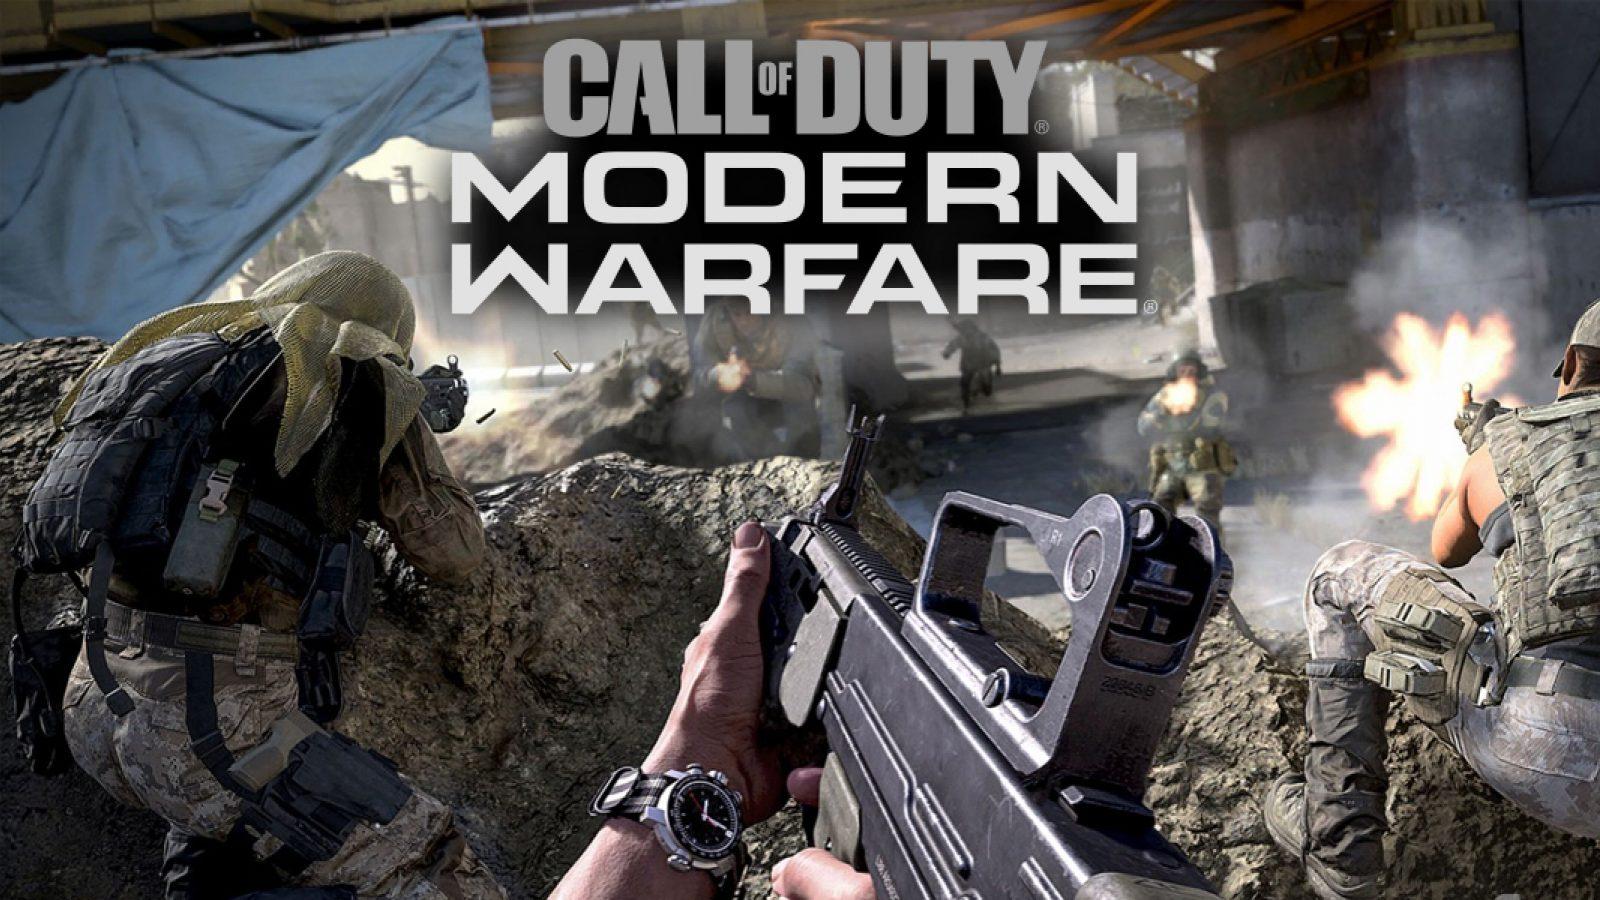 Modern Warfare 2 campaign: Storyline, characters, missions - Charlie INTEL